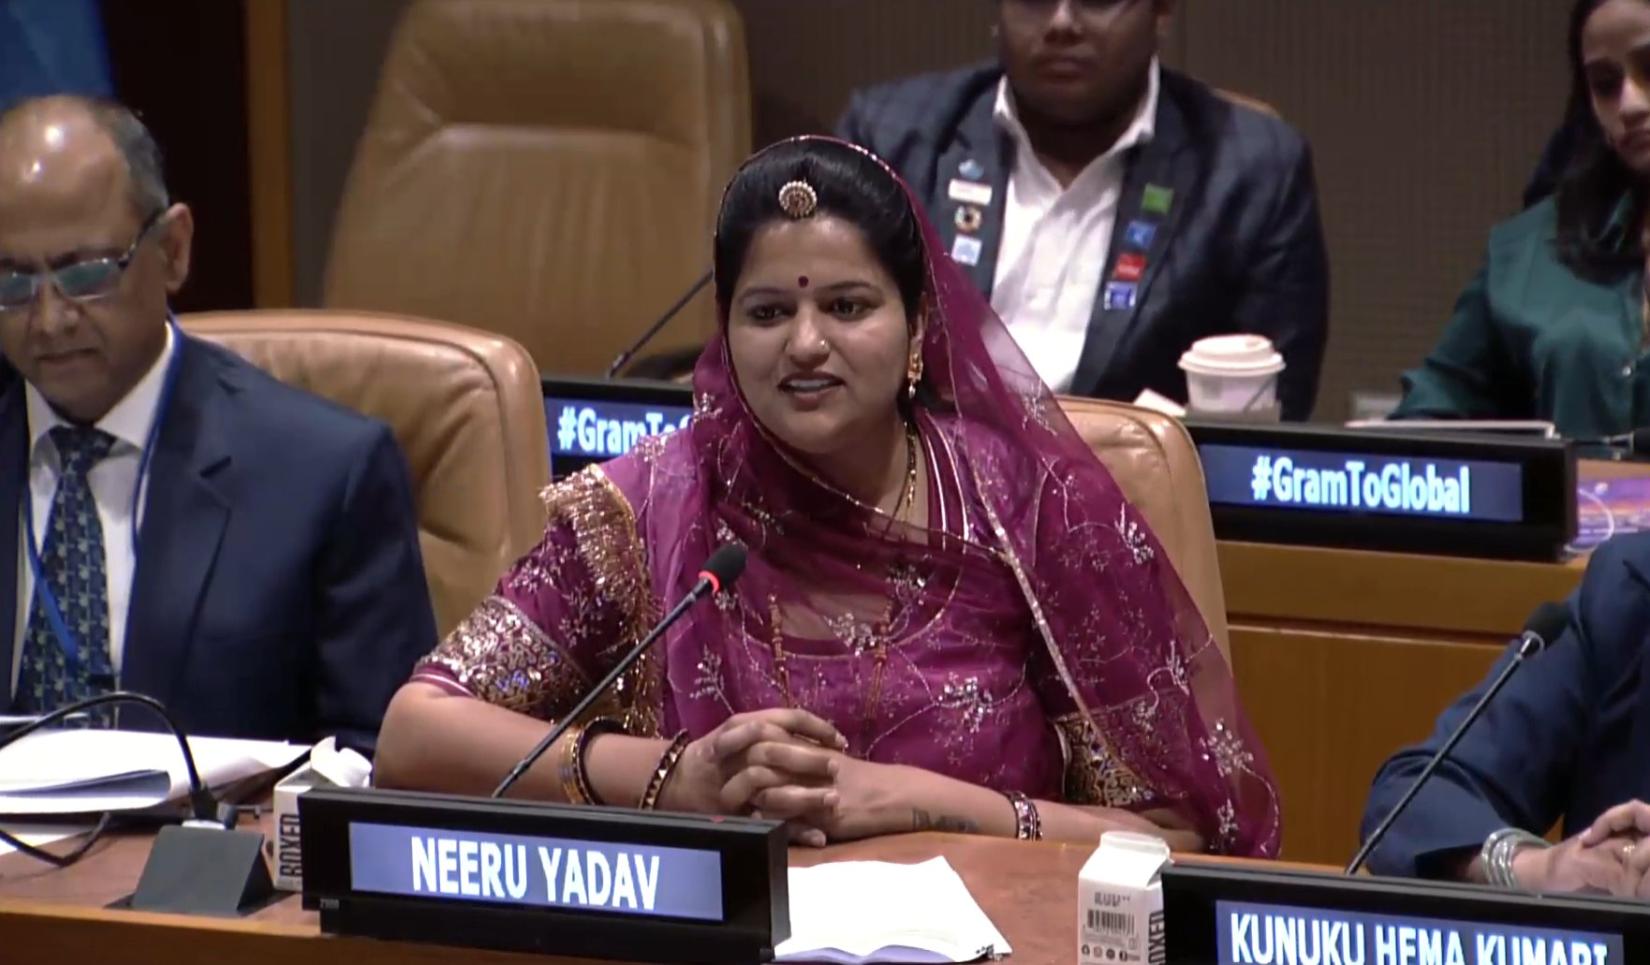 'Hockey wali sarpanch' Neeru Yadav from Rajasthan at the 57th United Nations Economic and Social Commission for Population Development